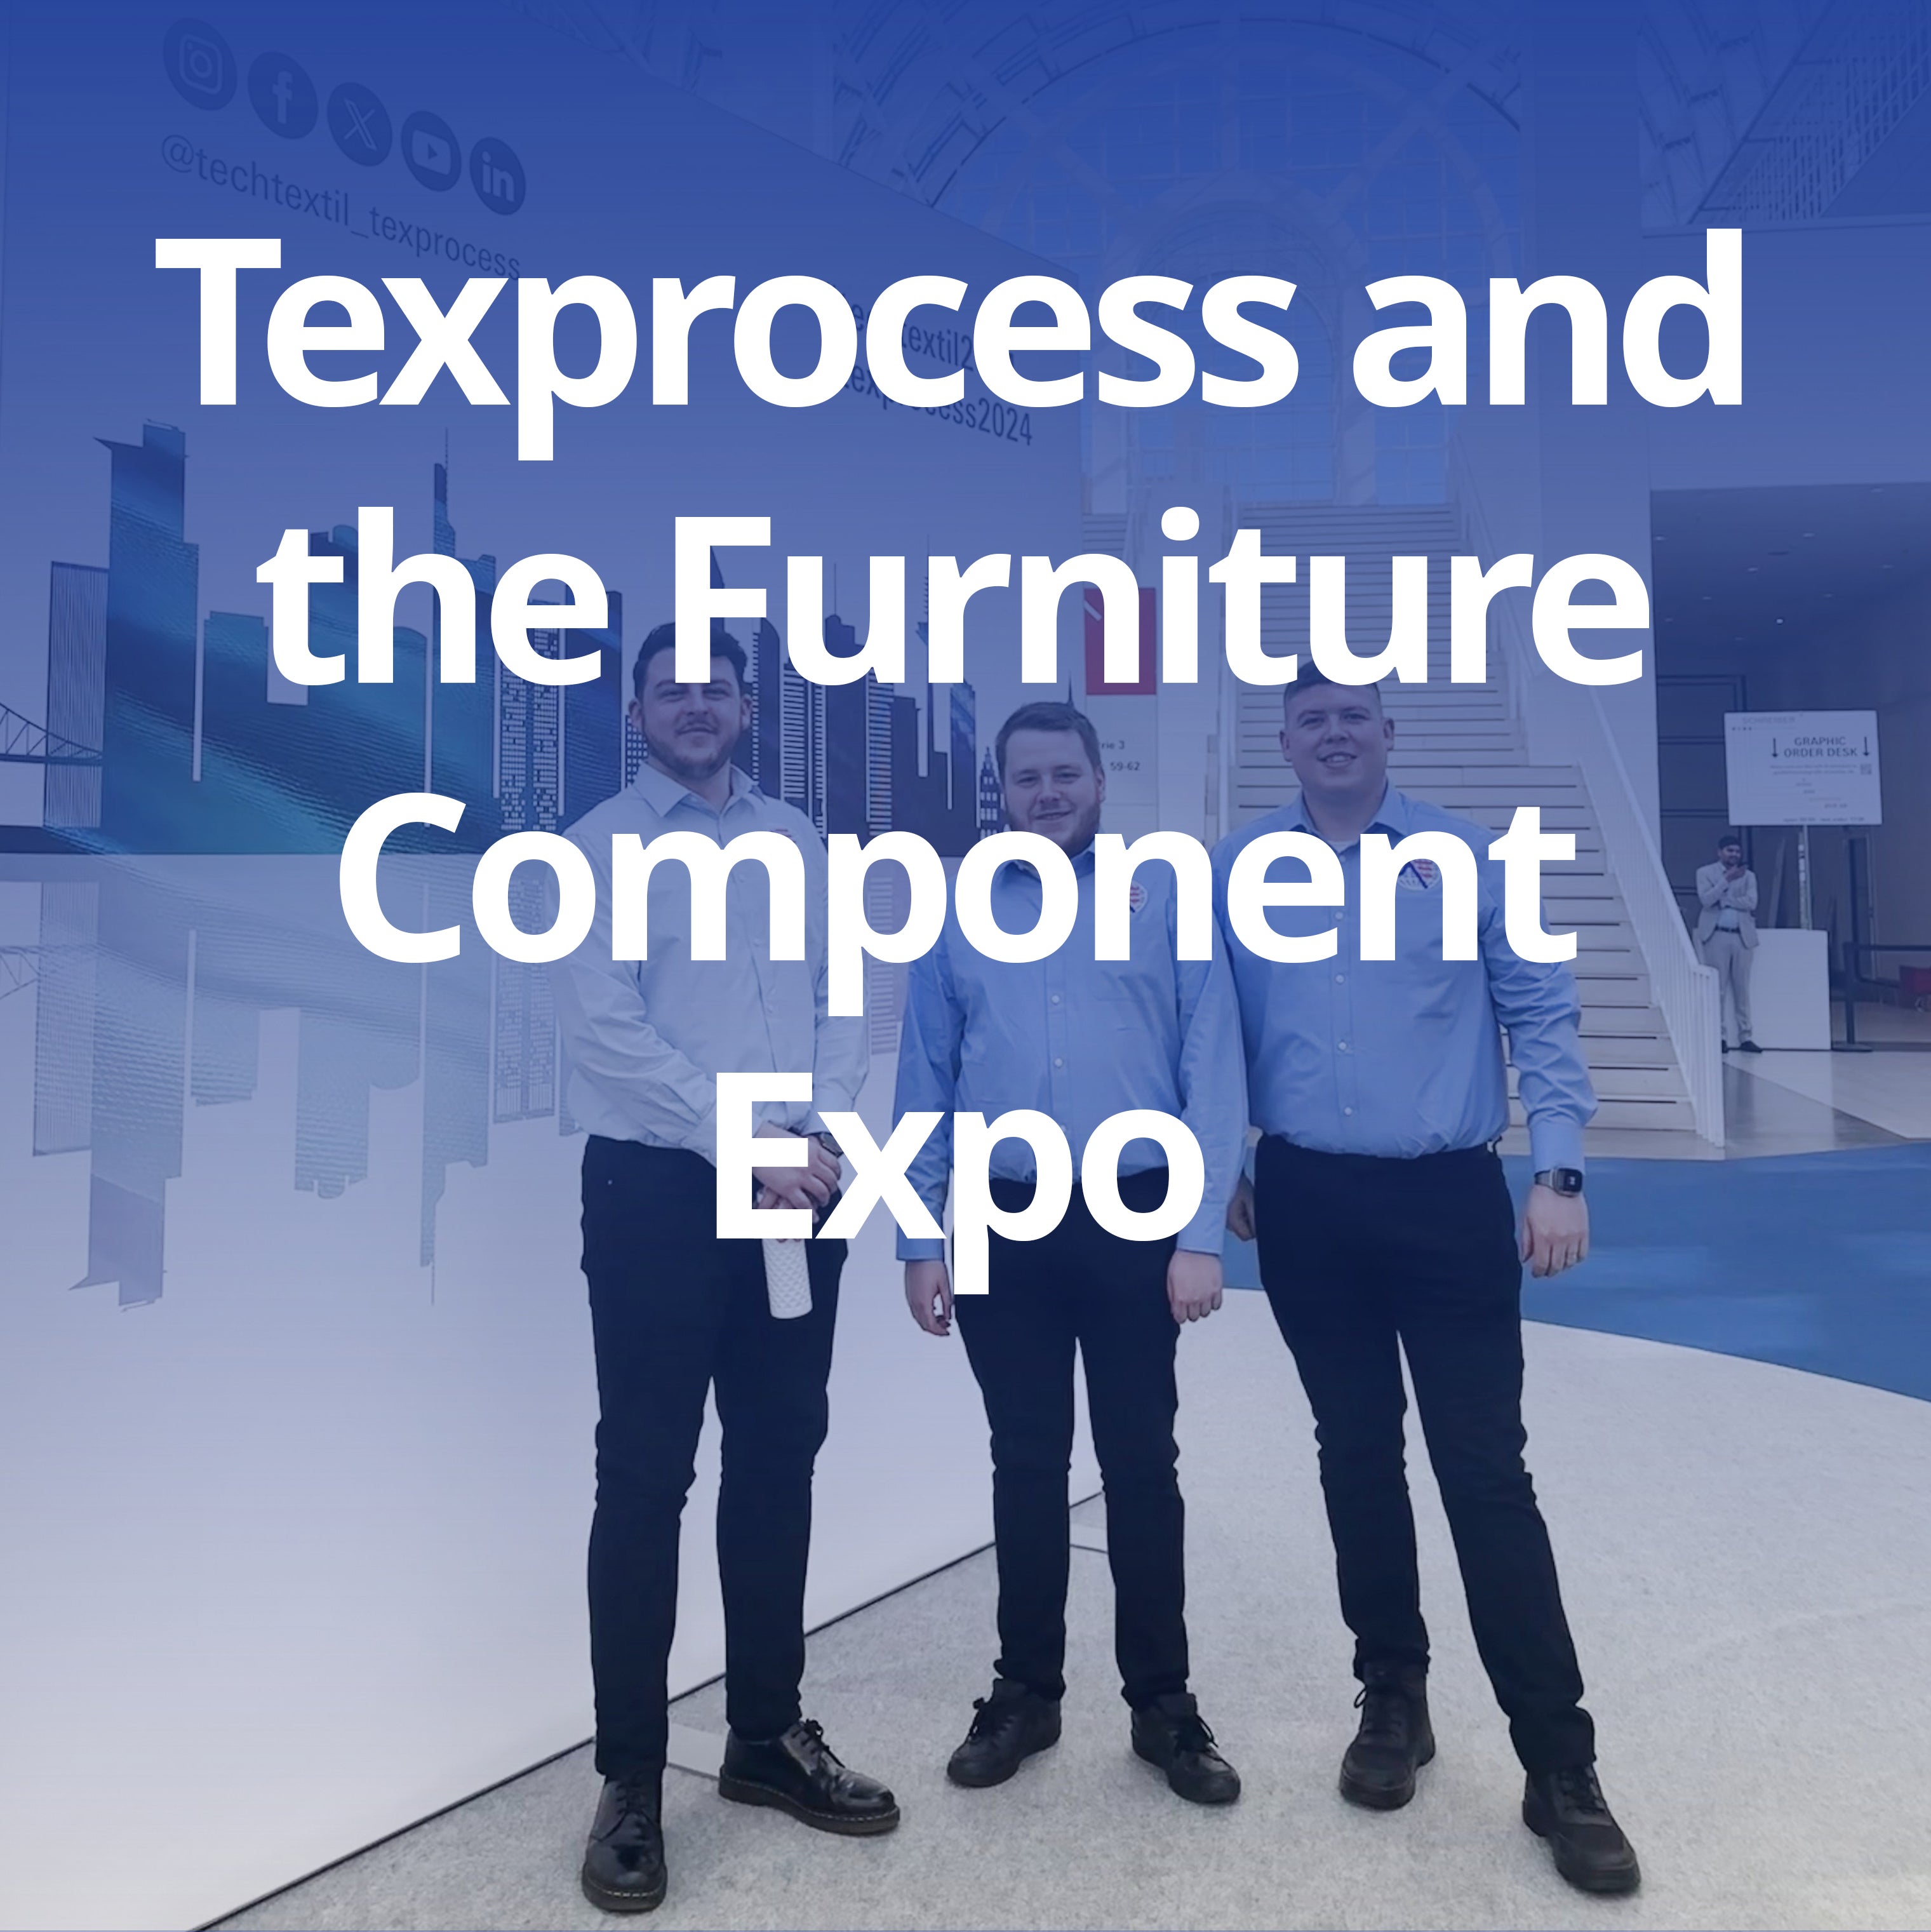 Texprocess and the Furniture Component Expo